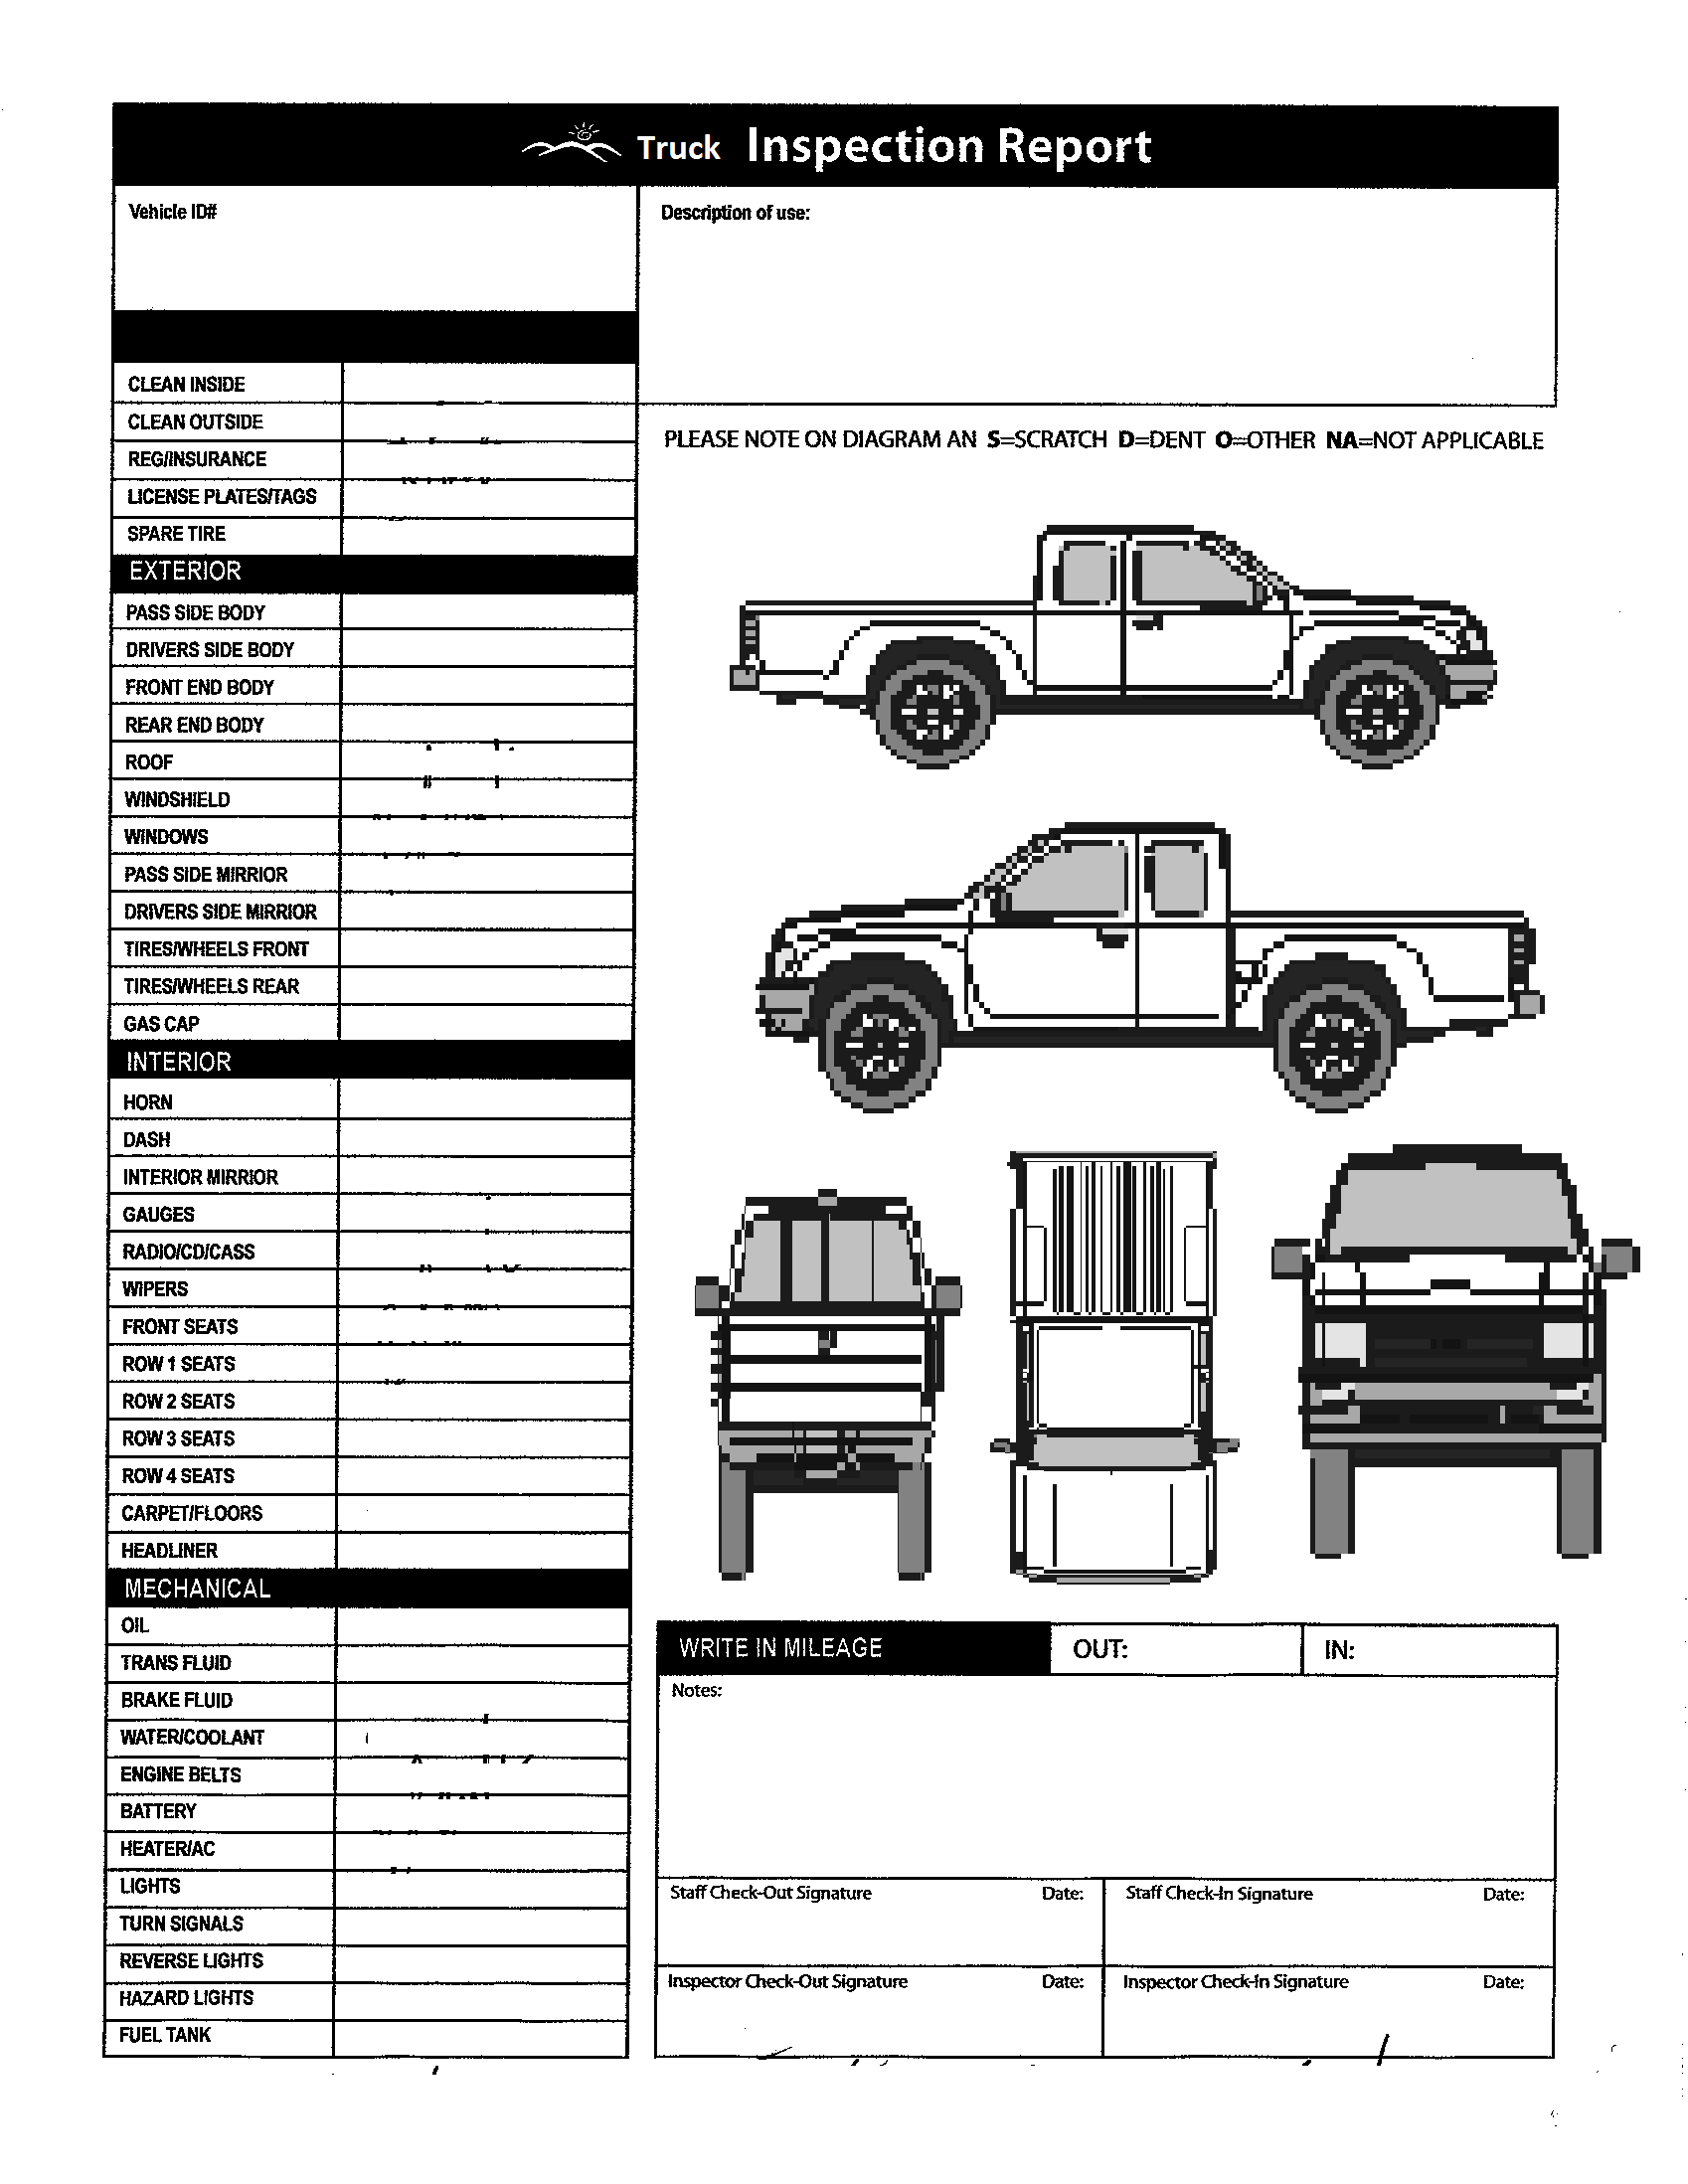 inspection checklist vehicle form template report printable daily truck pickup check list word safety damage awesome contracts regarding printablee layout